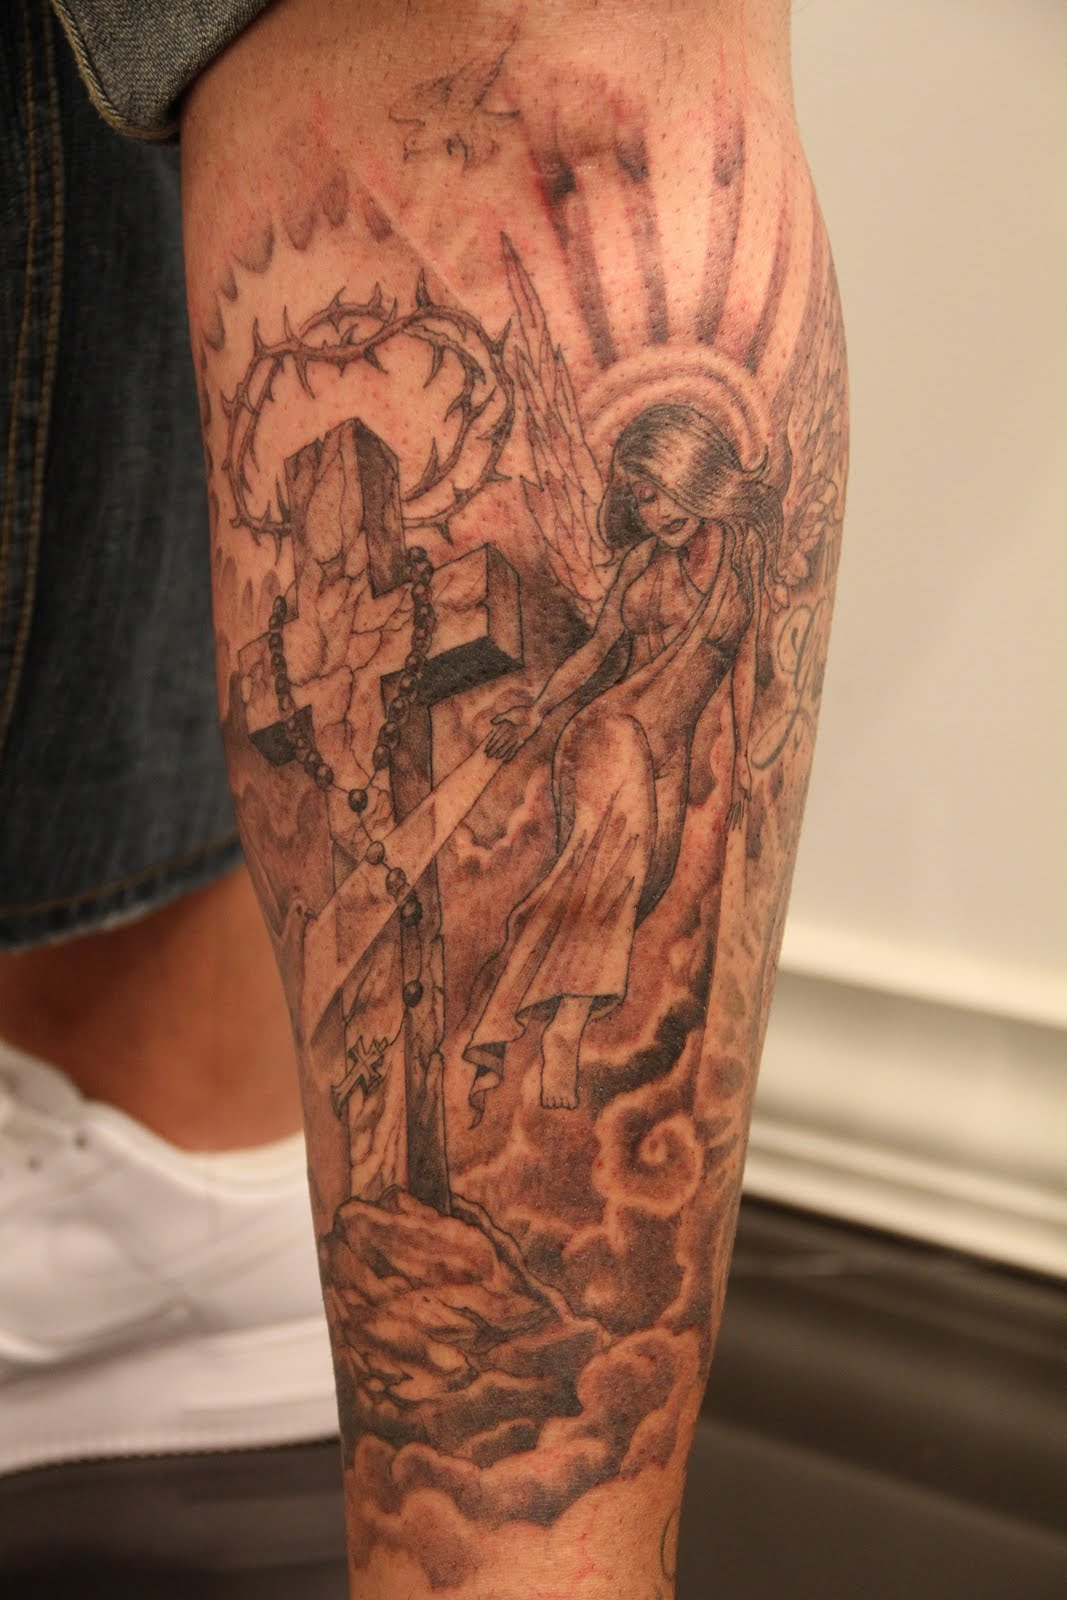 Awesome Religious Christian Tattoo Mr Cartoon throughout sizing 1067 X 1600